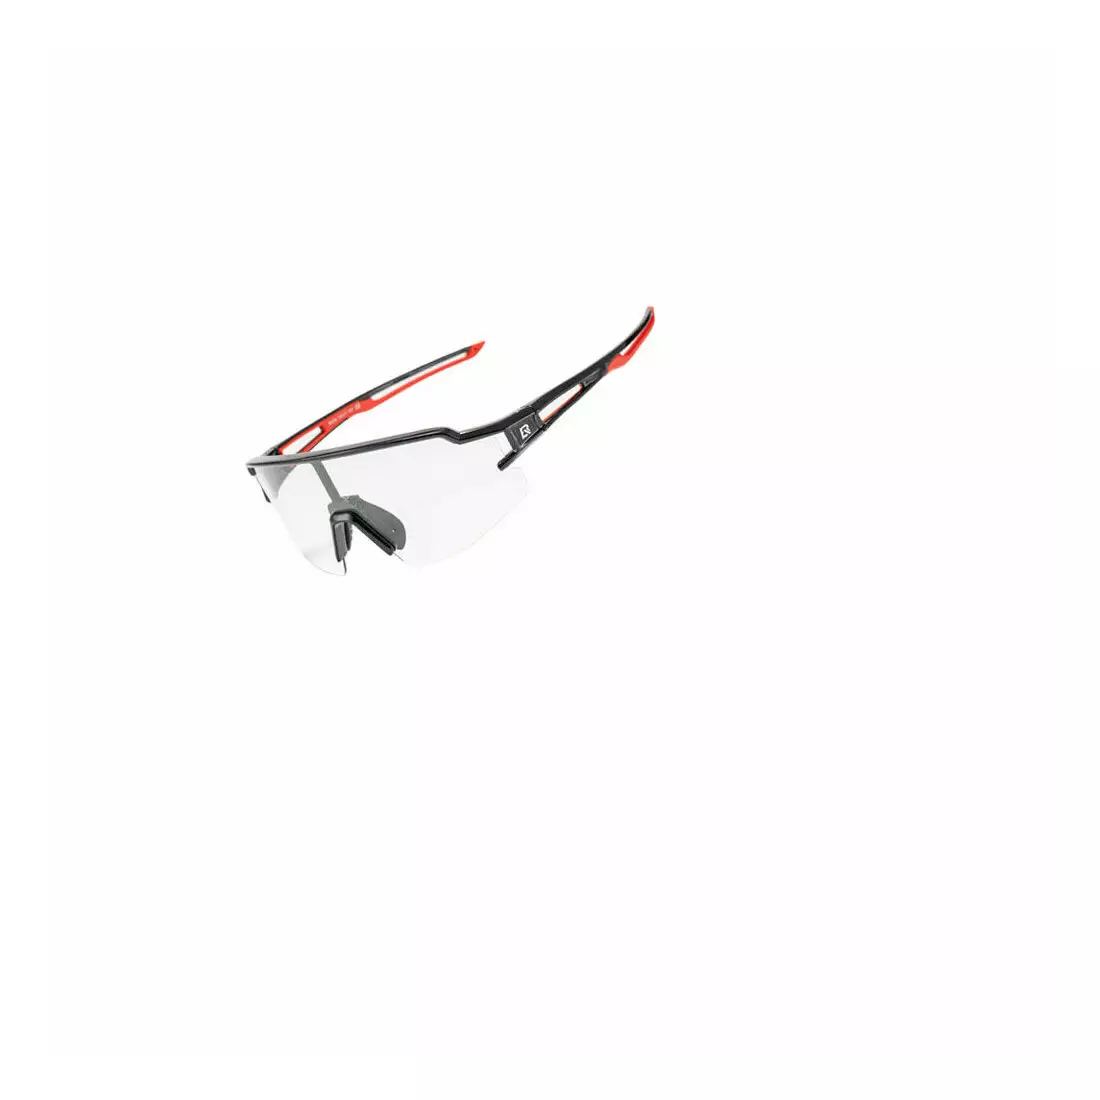 Rockbros 10173 bicycle / sports glasses with photochrome black